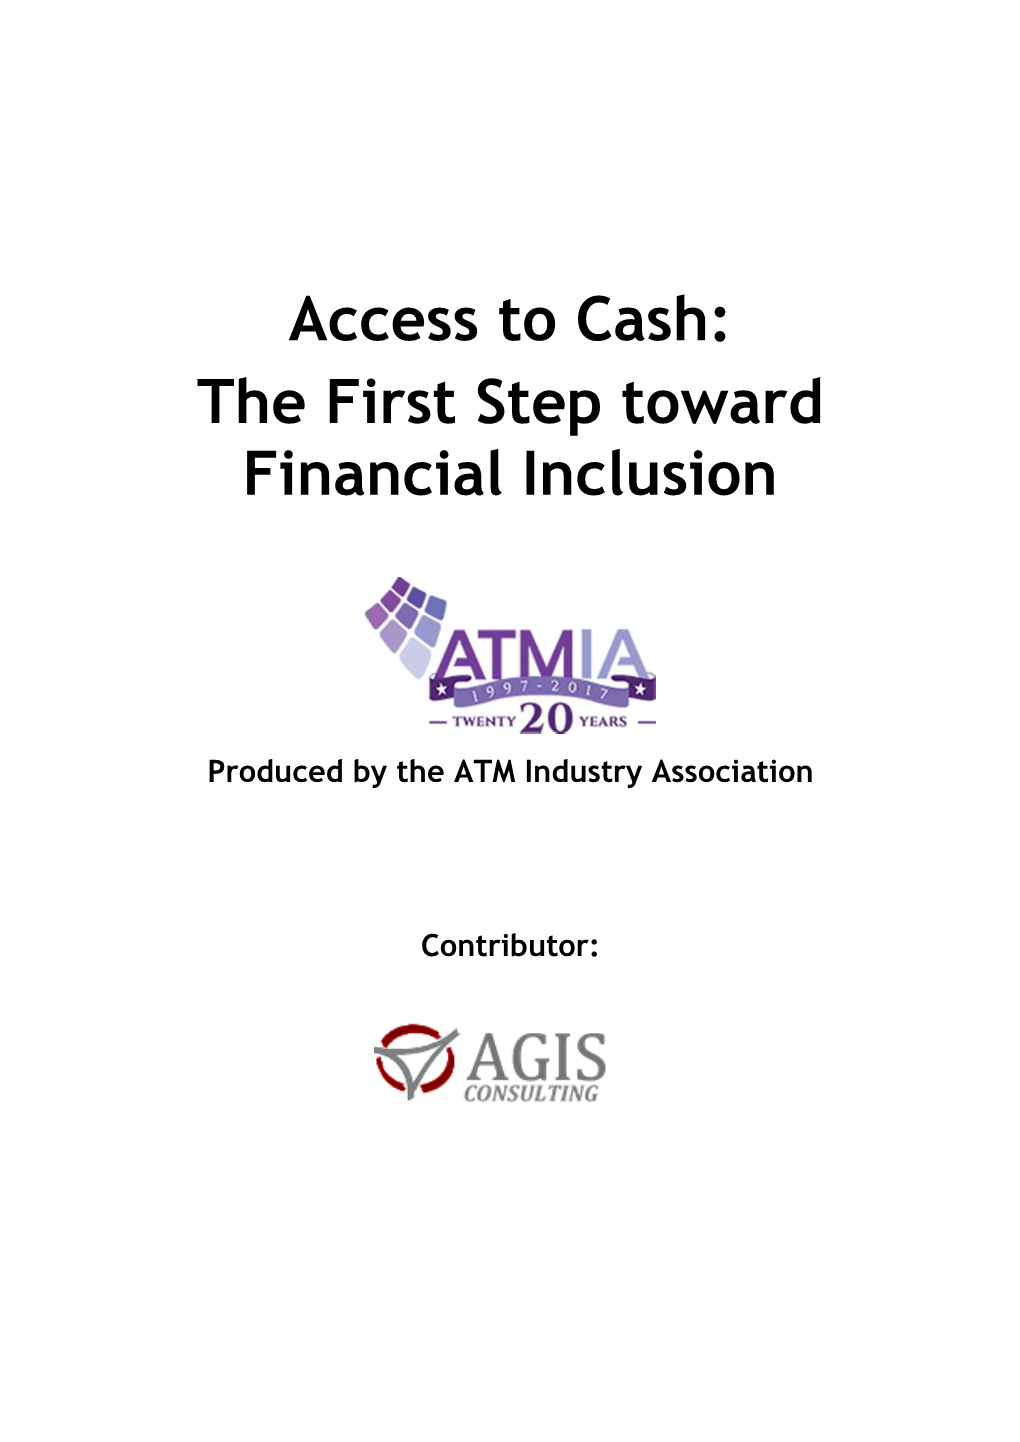 The First Step Toward Financial Inclusion